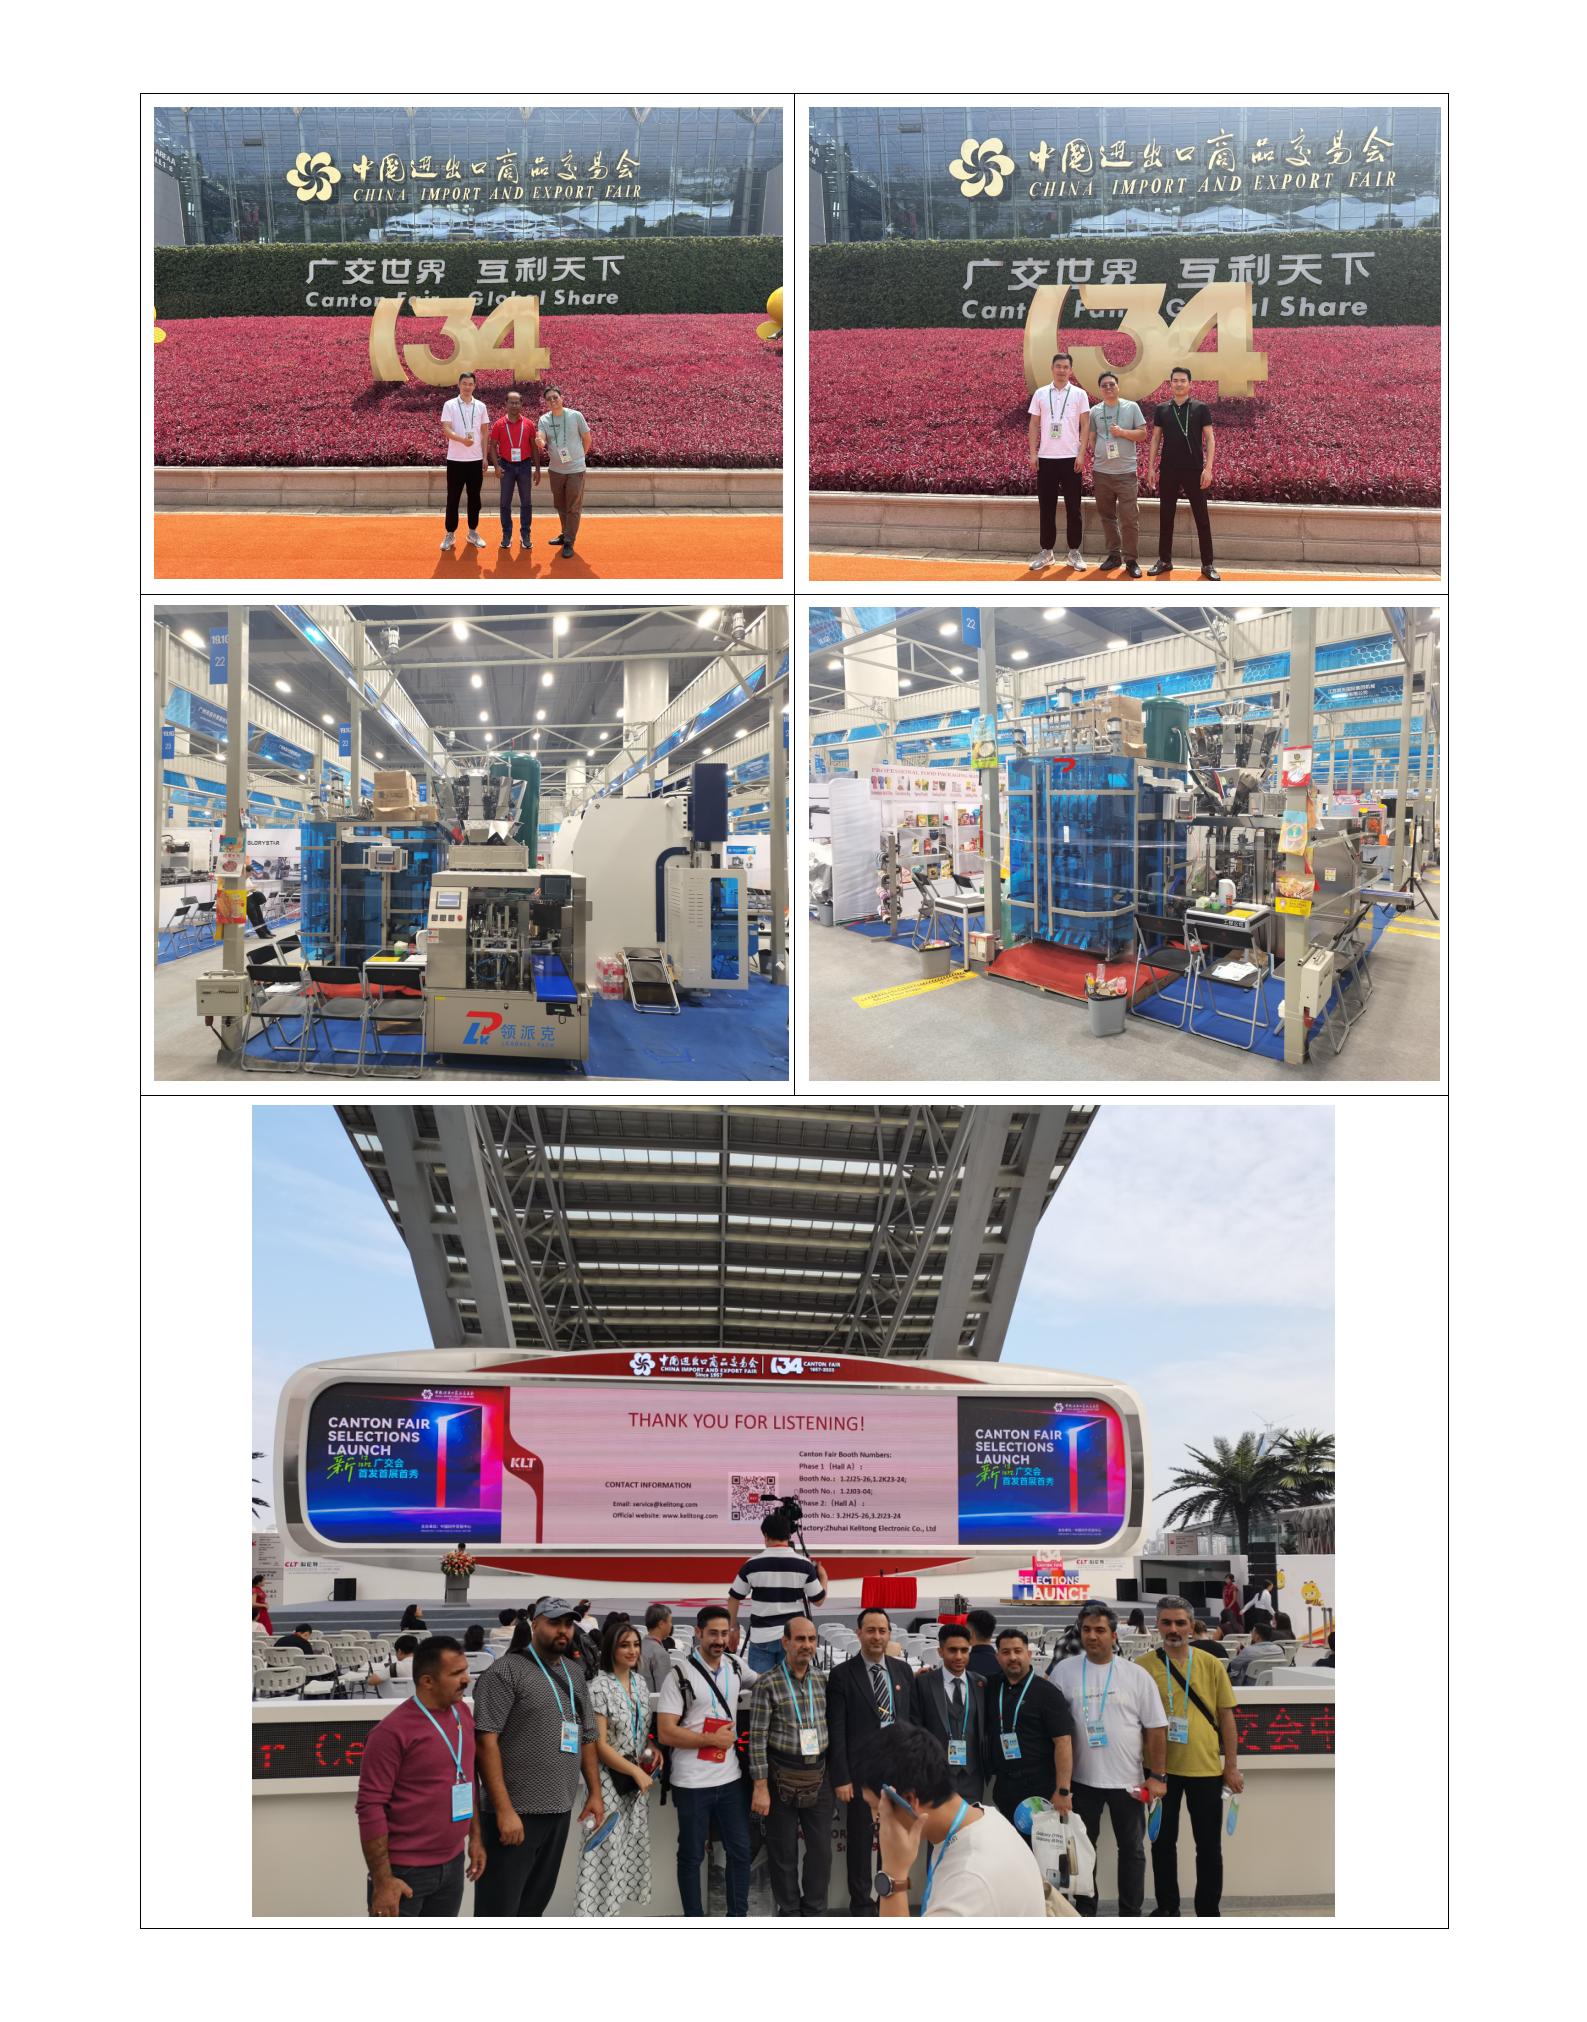 Leadallpack is participating in The 134th Session Canton Fair